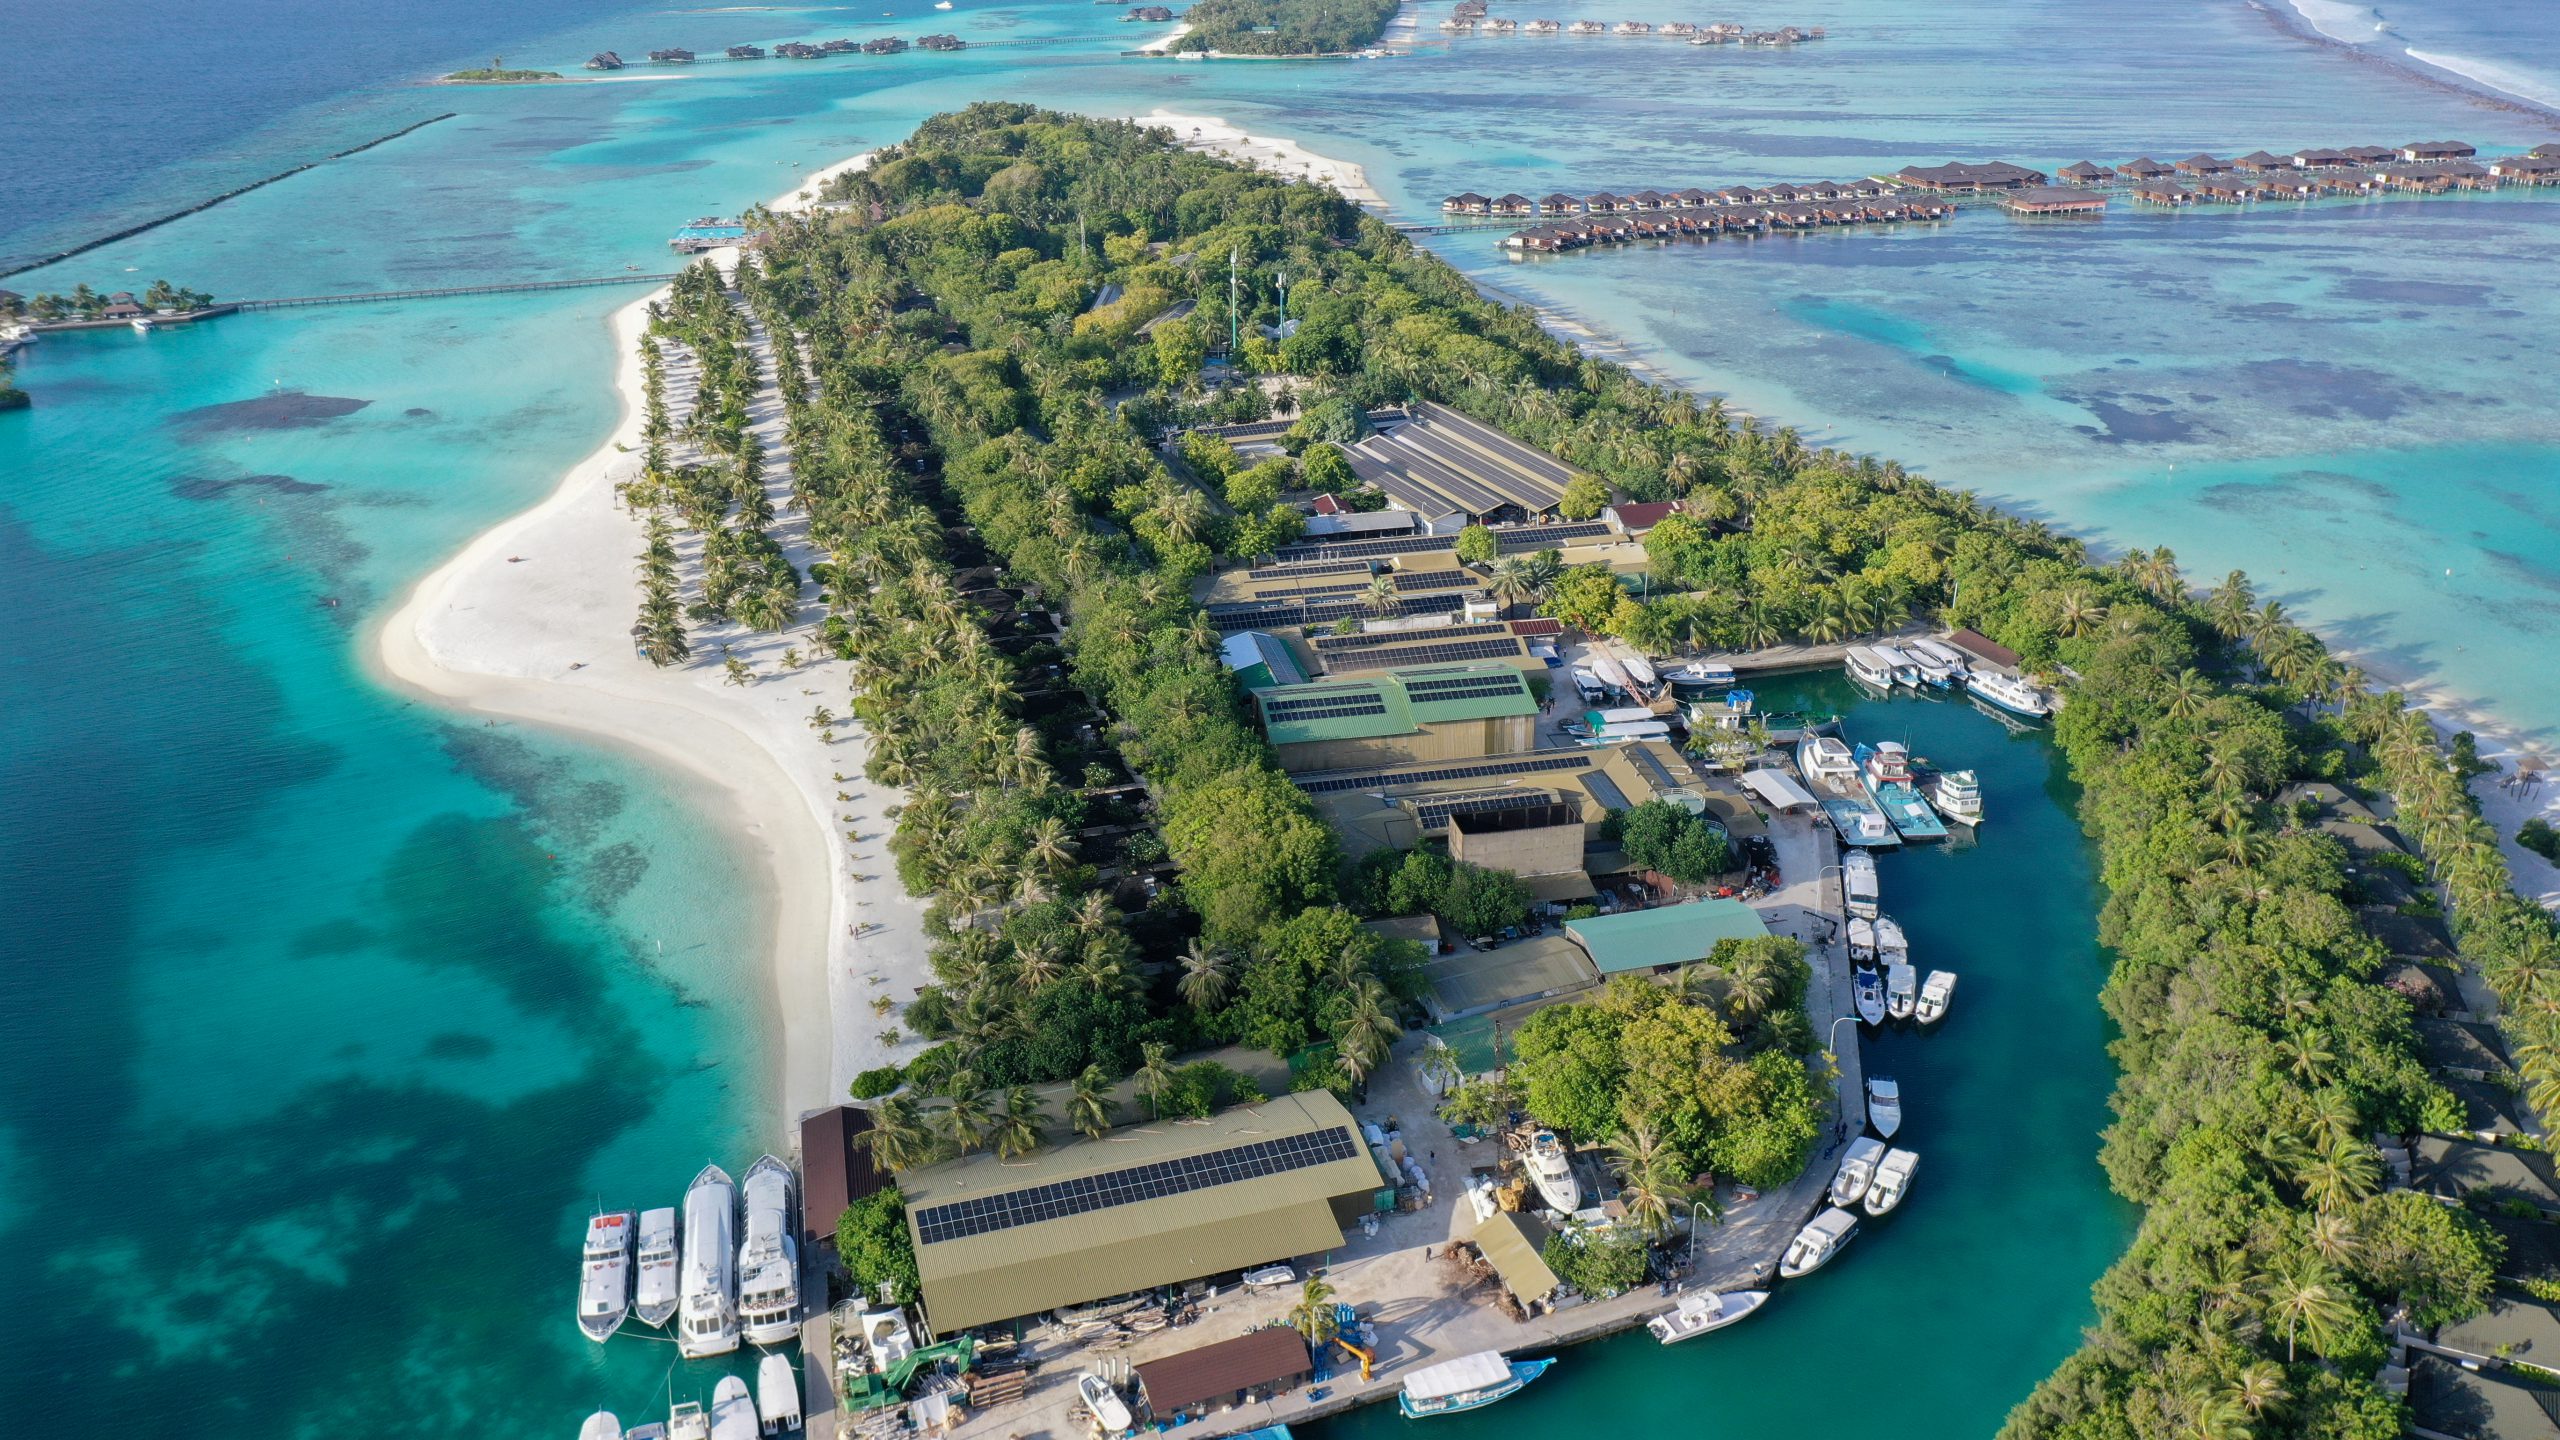 Rooftop Solar PV system by Swimsol at Villa Nautica Maldives